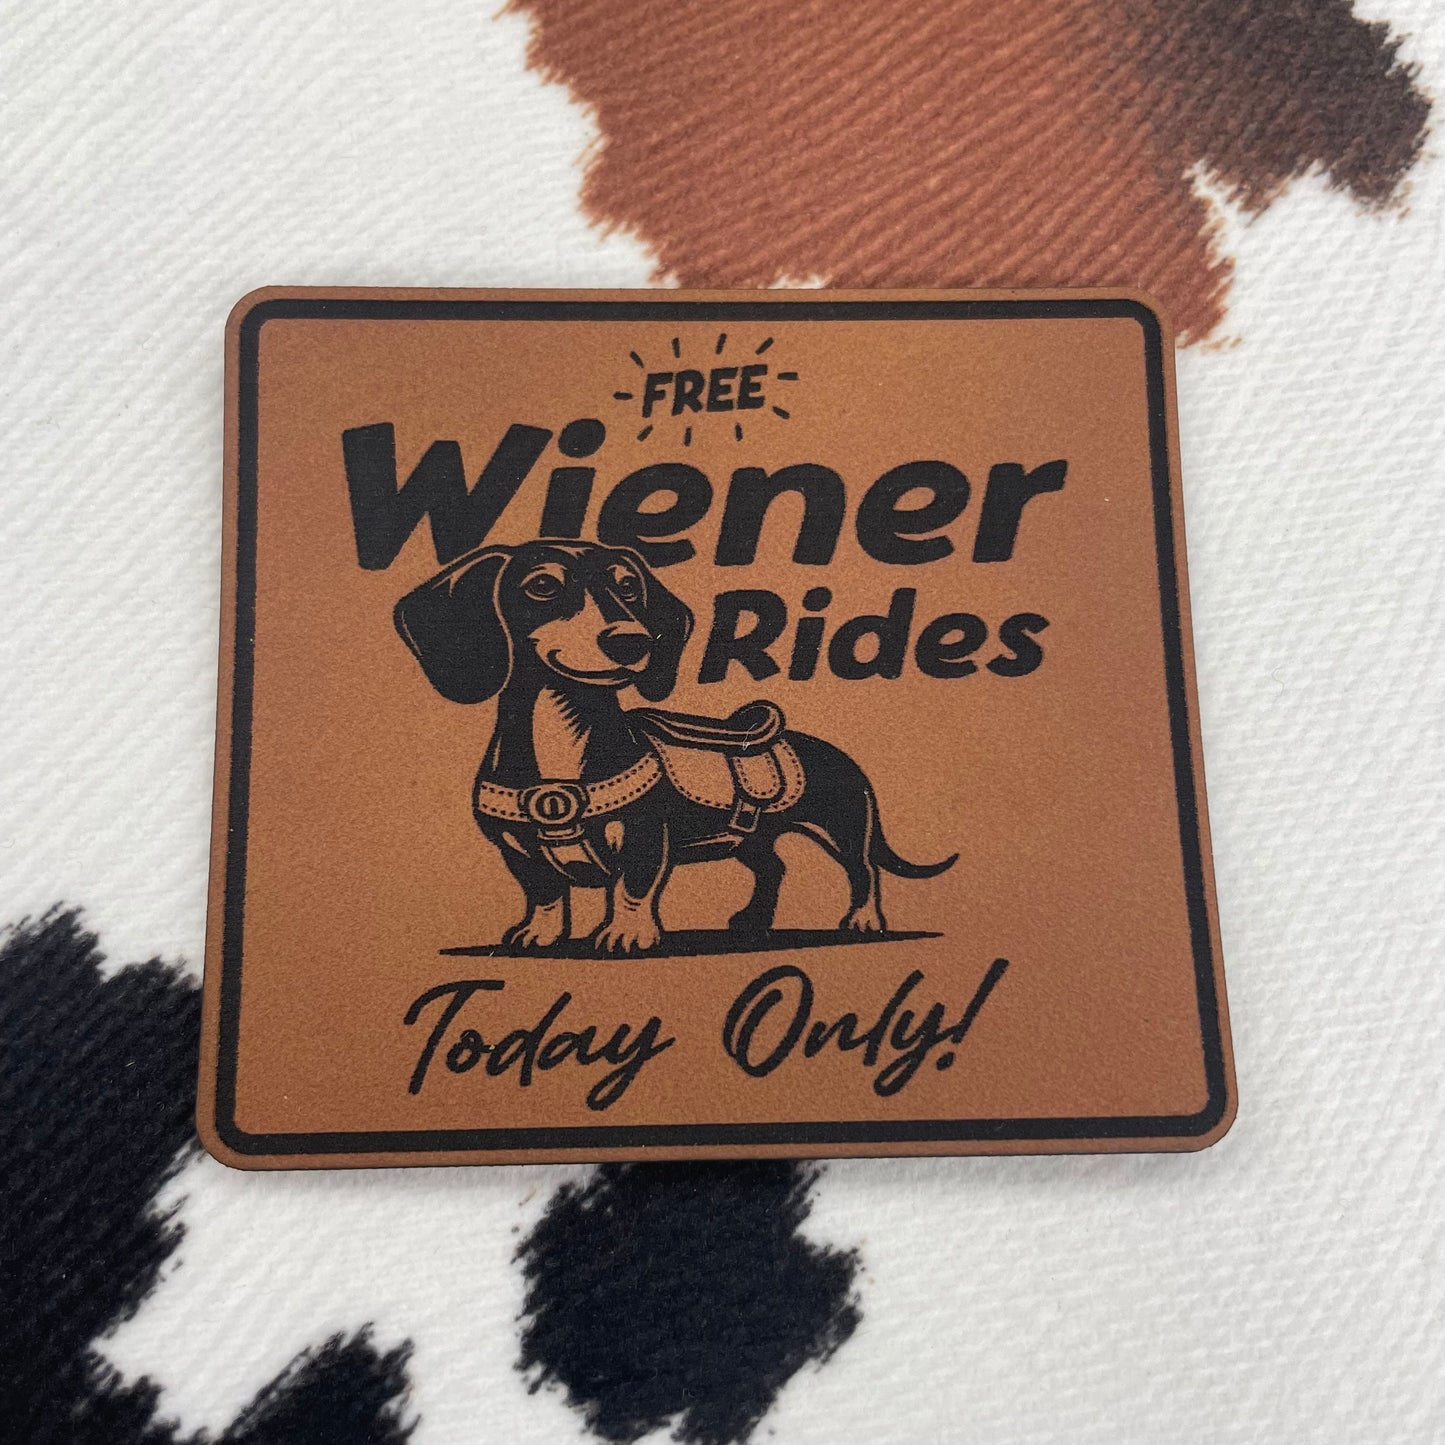 Free Weiner Rides- 2.5" wide x 2.25" tall Leatherette Patch